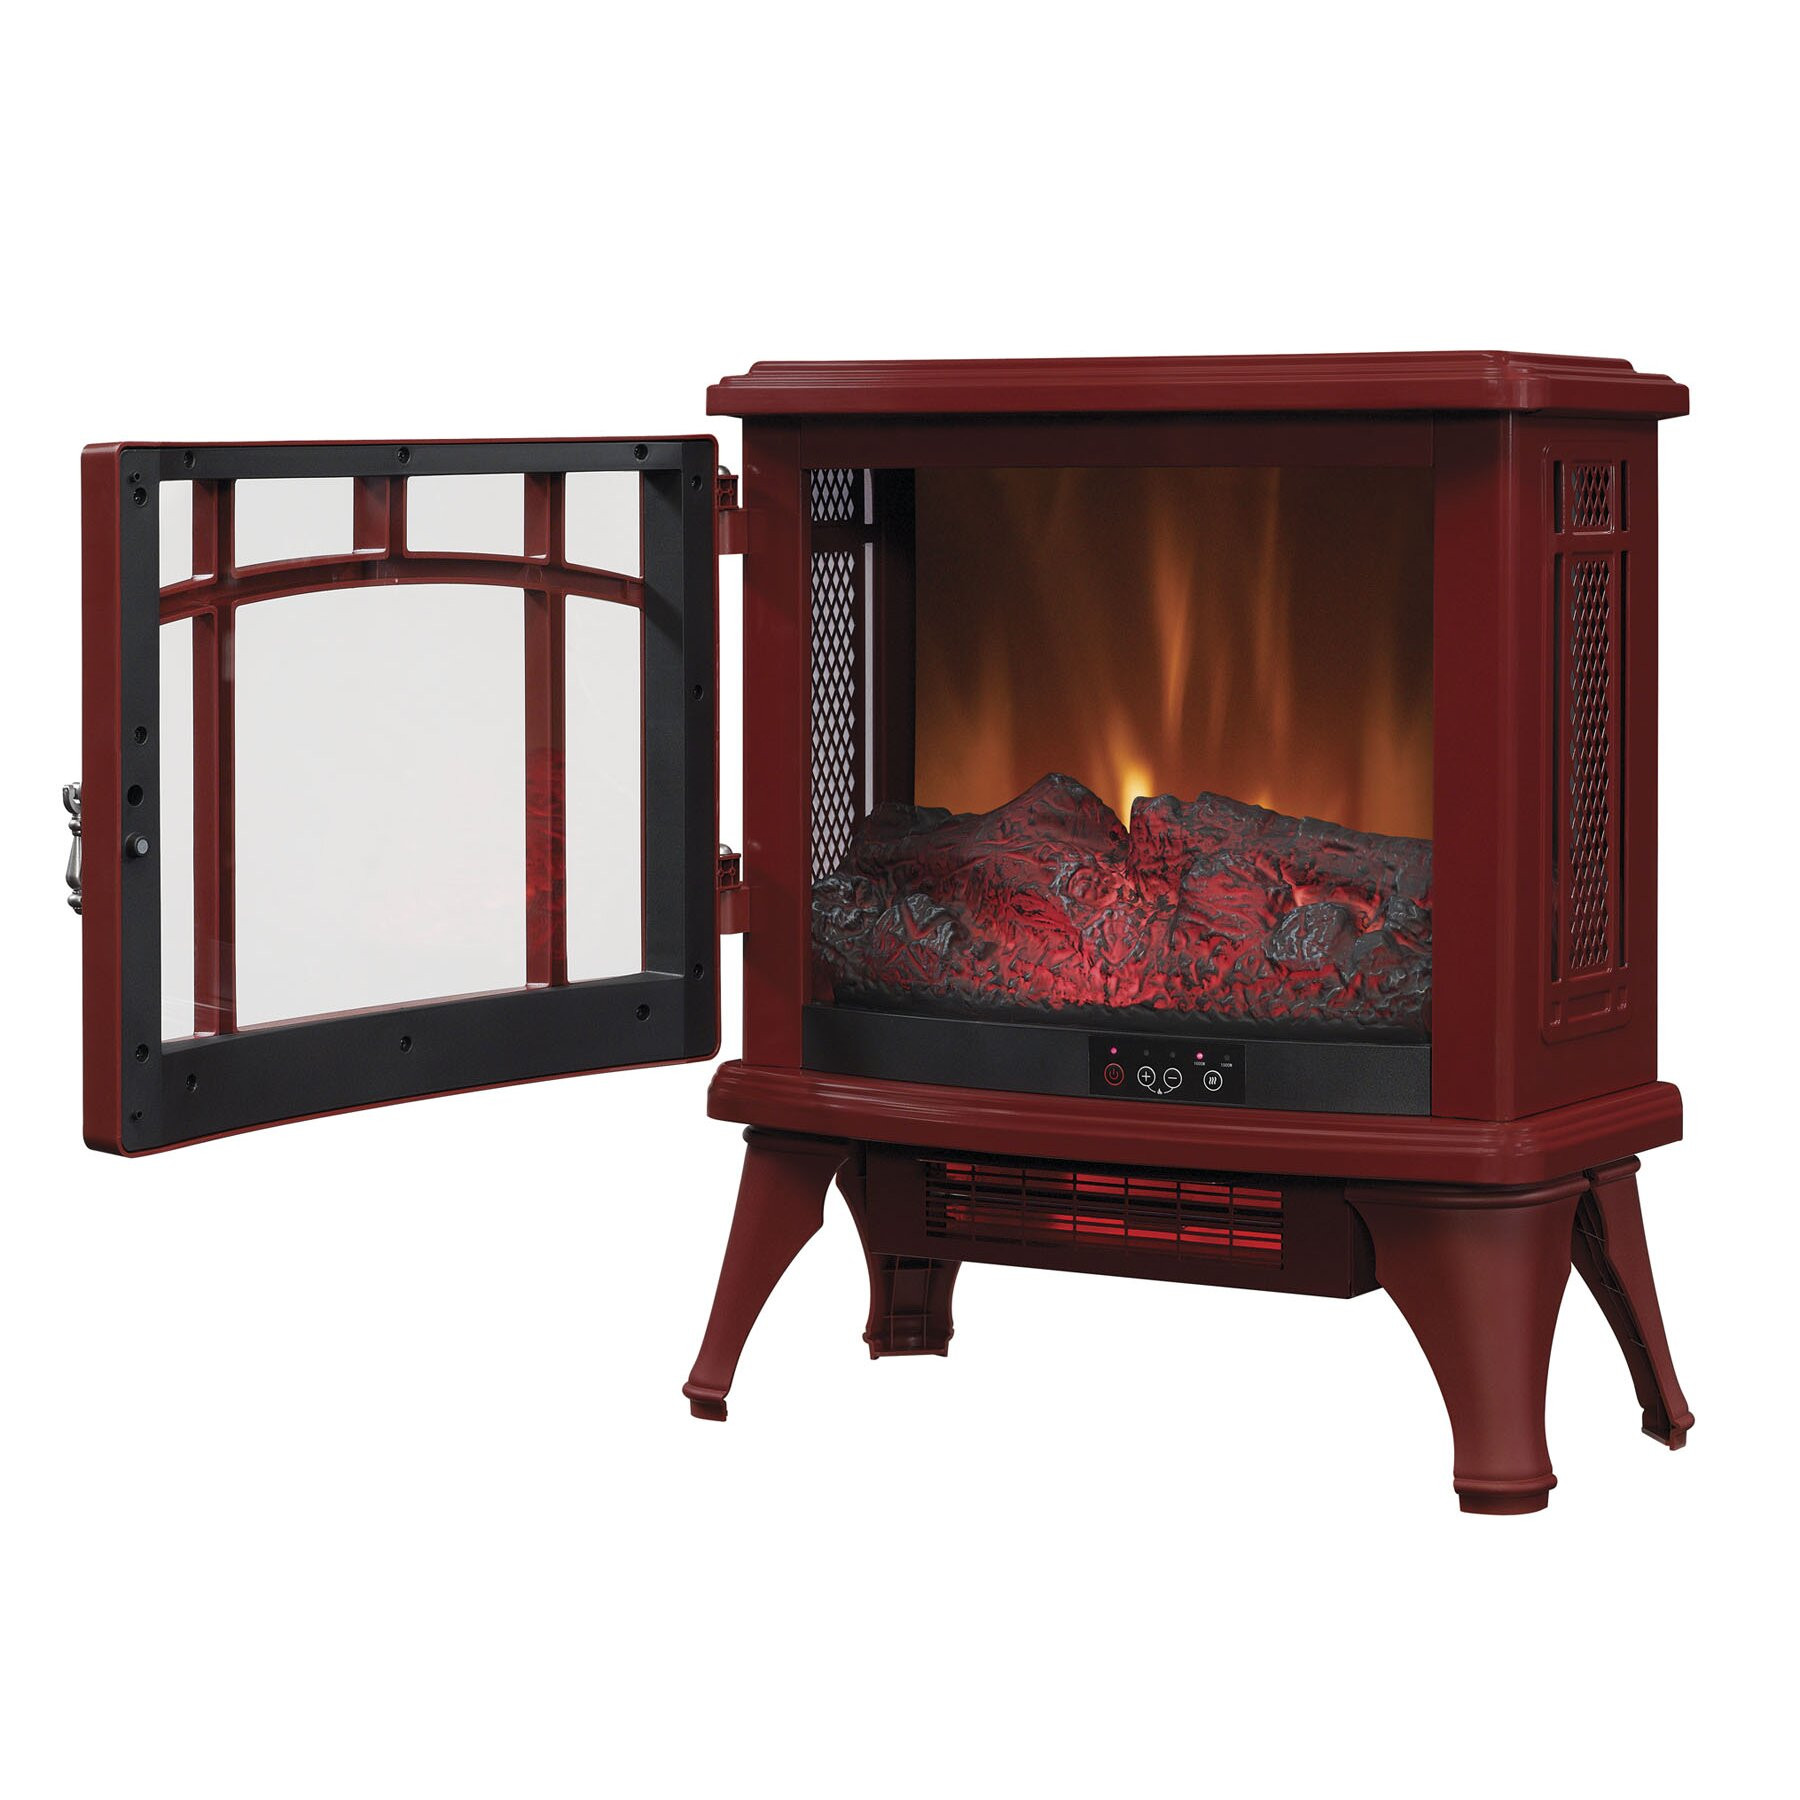 1000 Square Foot Electric Fireplace
 Duraflame Infrared Quartz Fireplace 1 000 Square Foot